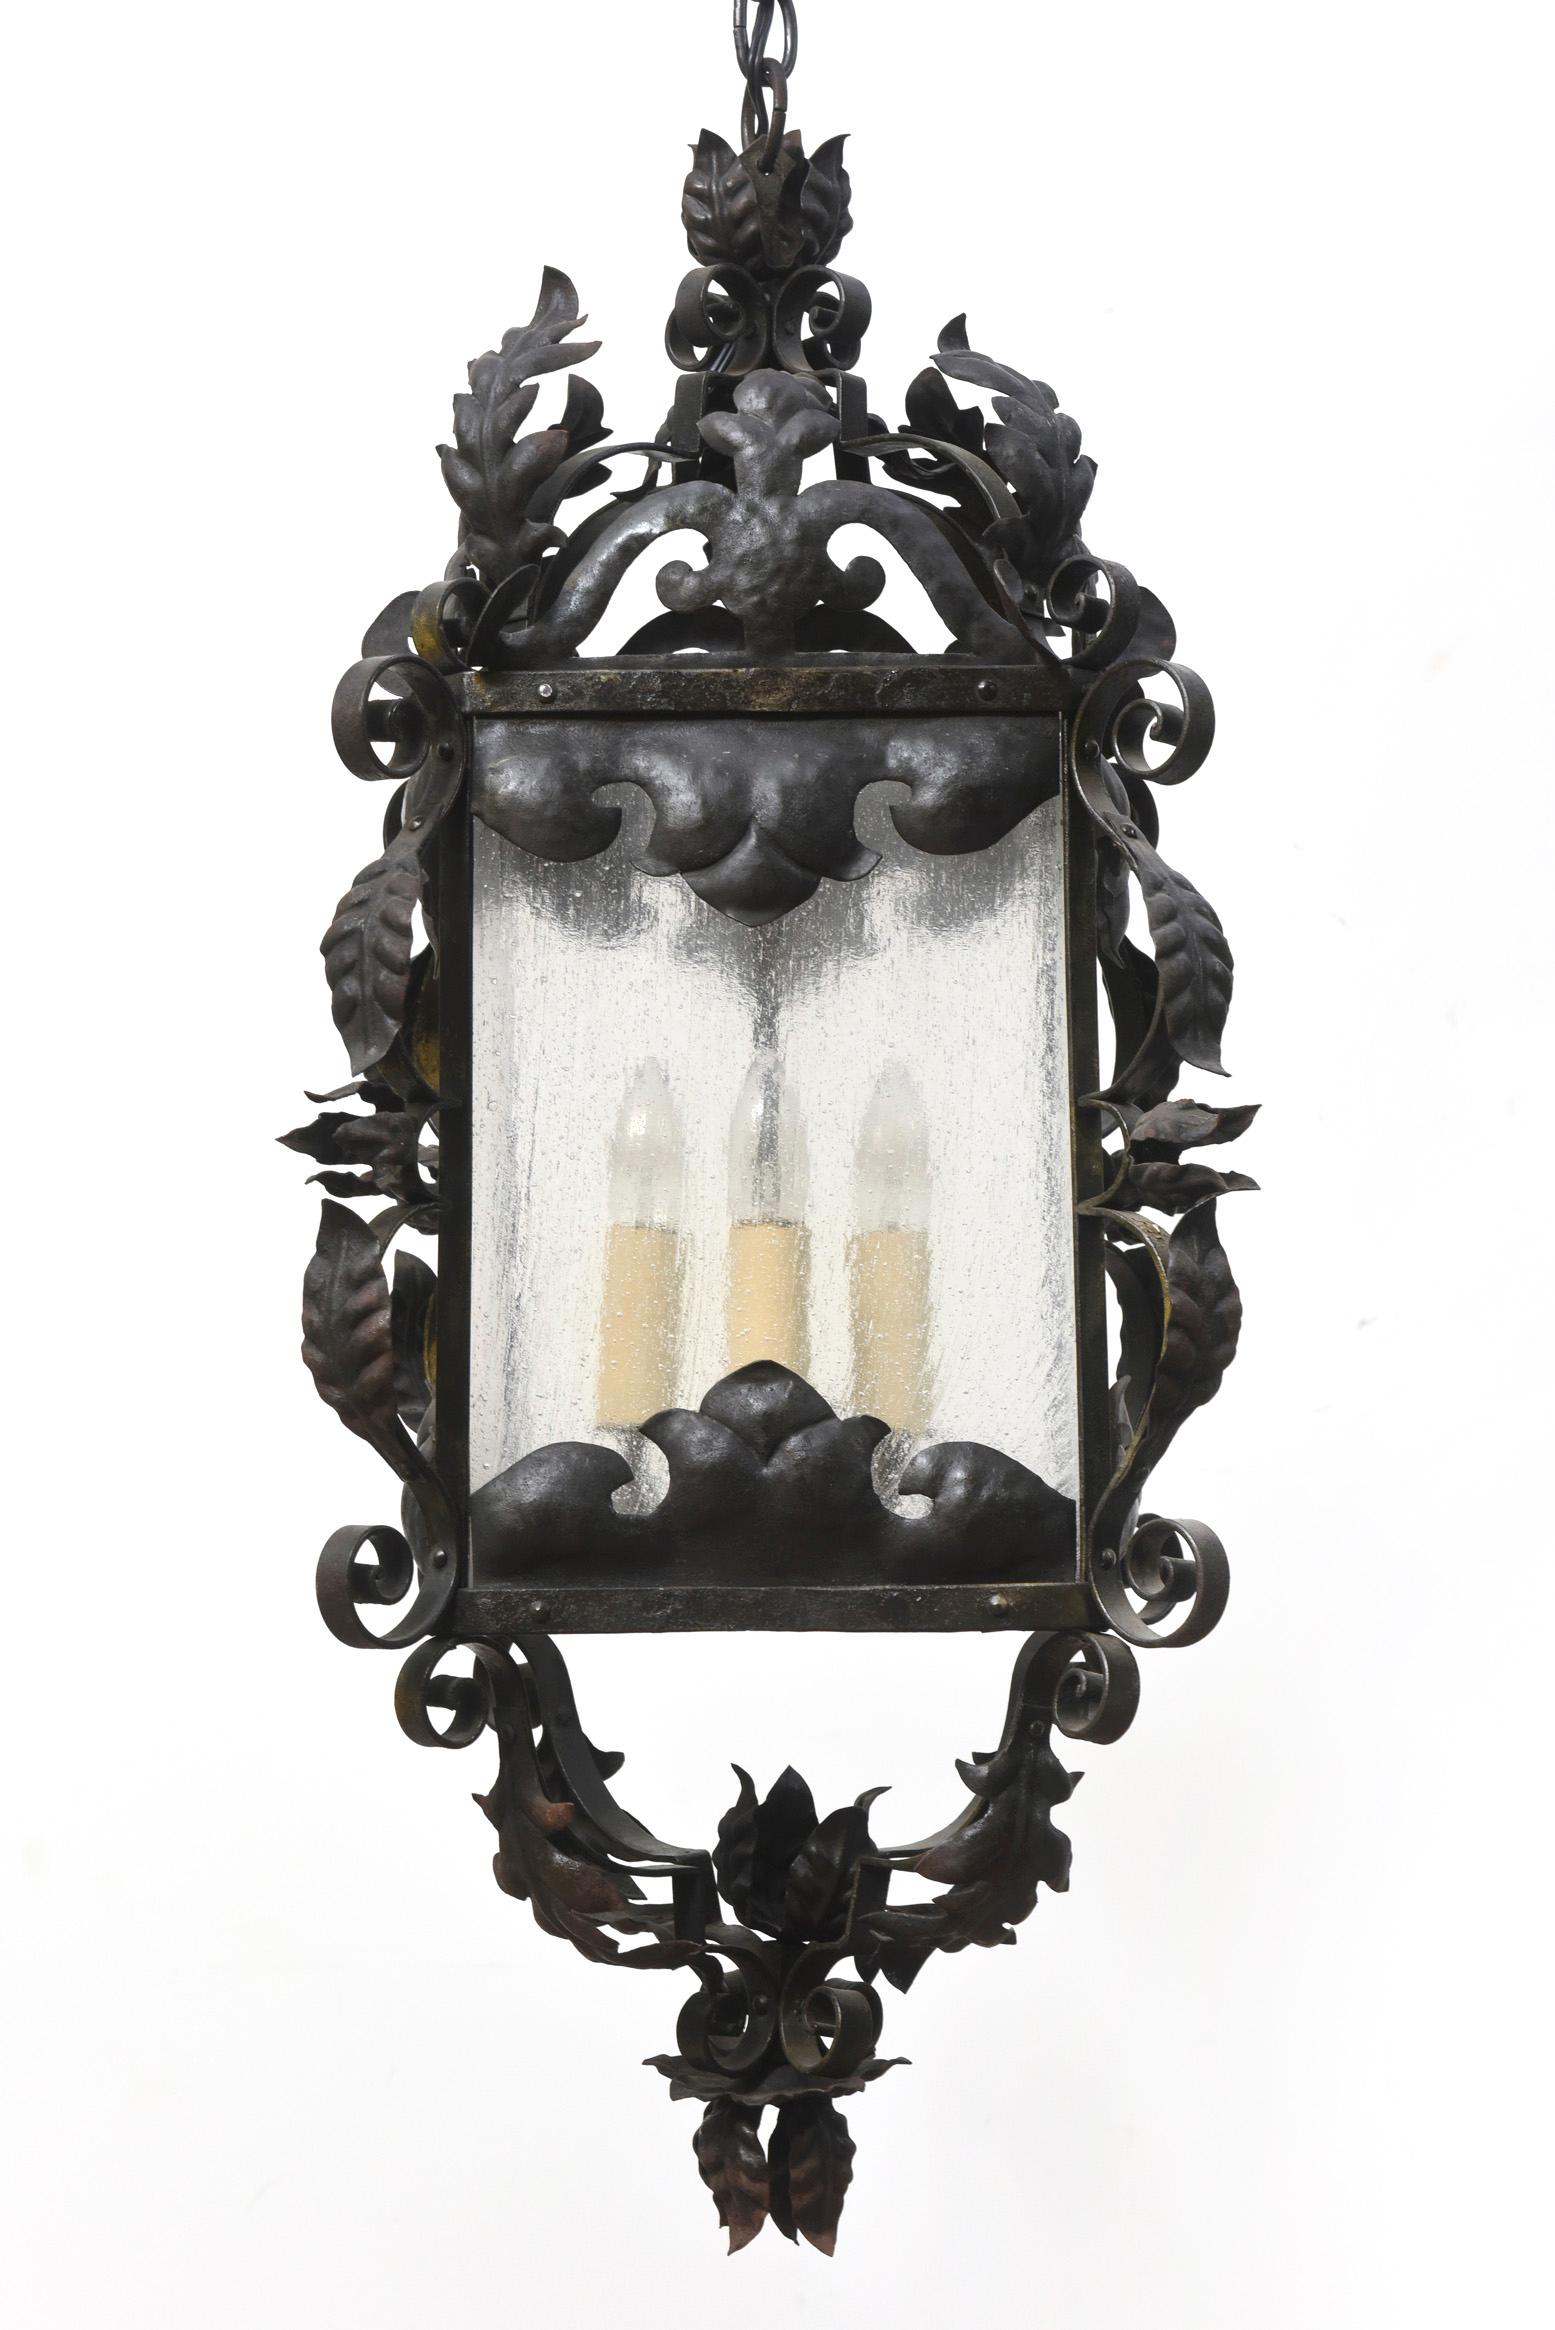 Italian ornate wrought iron lantern with original antique black painted finish and four seedy glass panels. Interior Use only. Four lights. Completely restored and rewired, ready to hang. Italian, C. 1900.